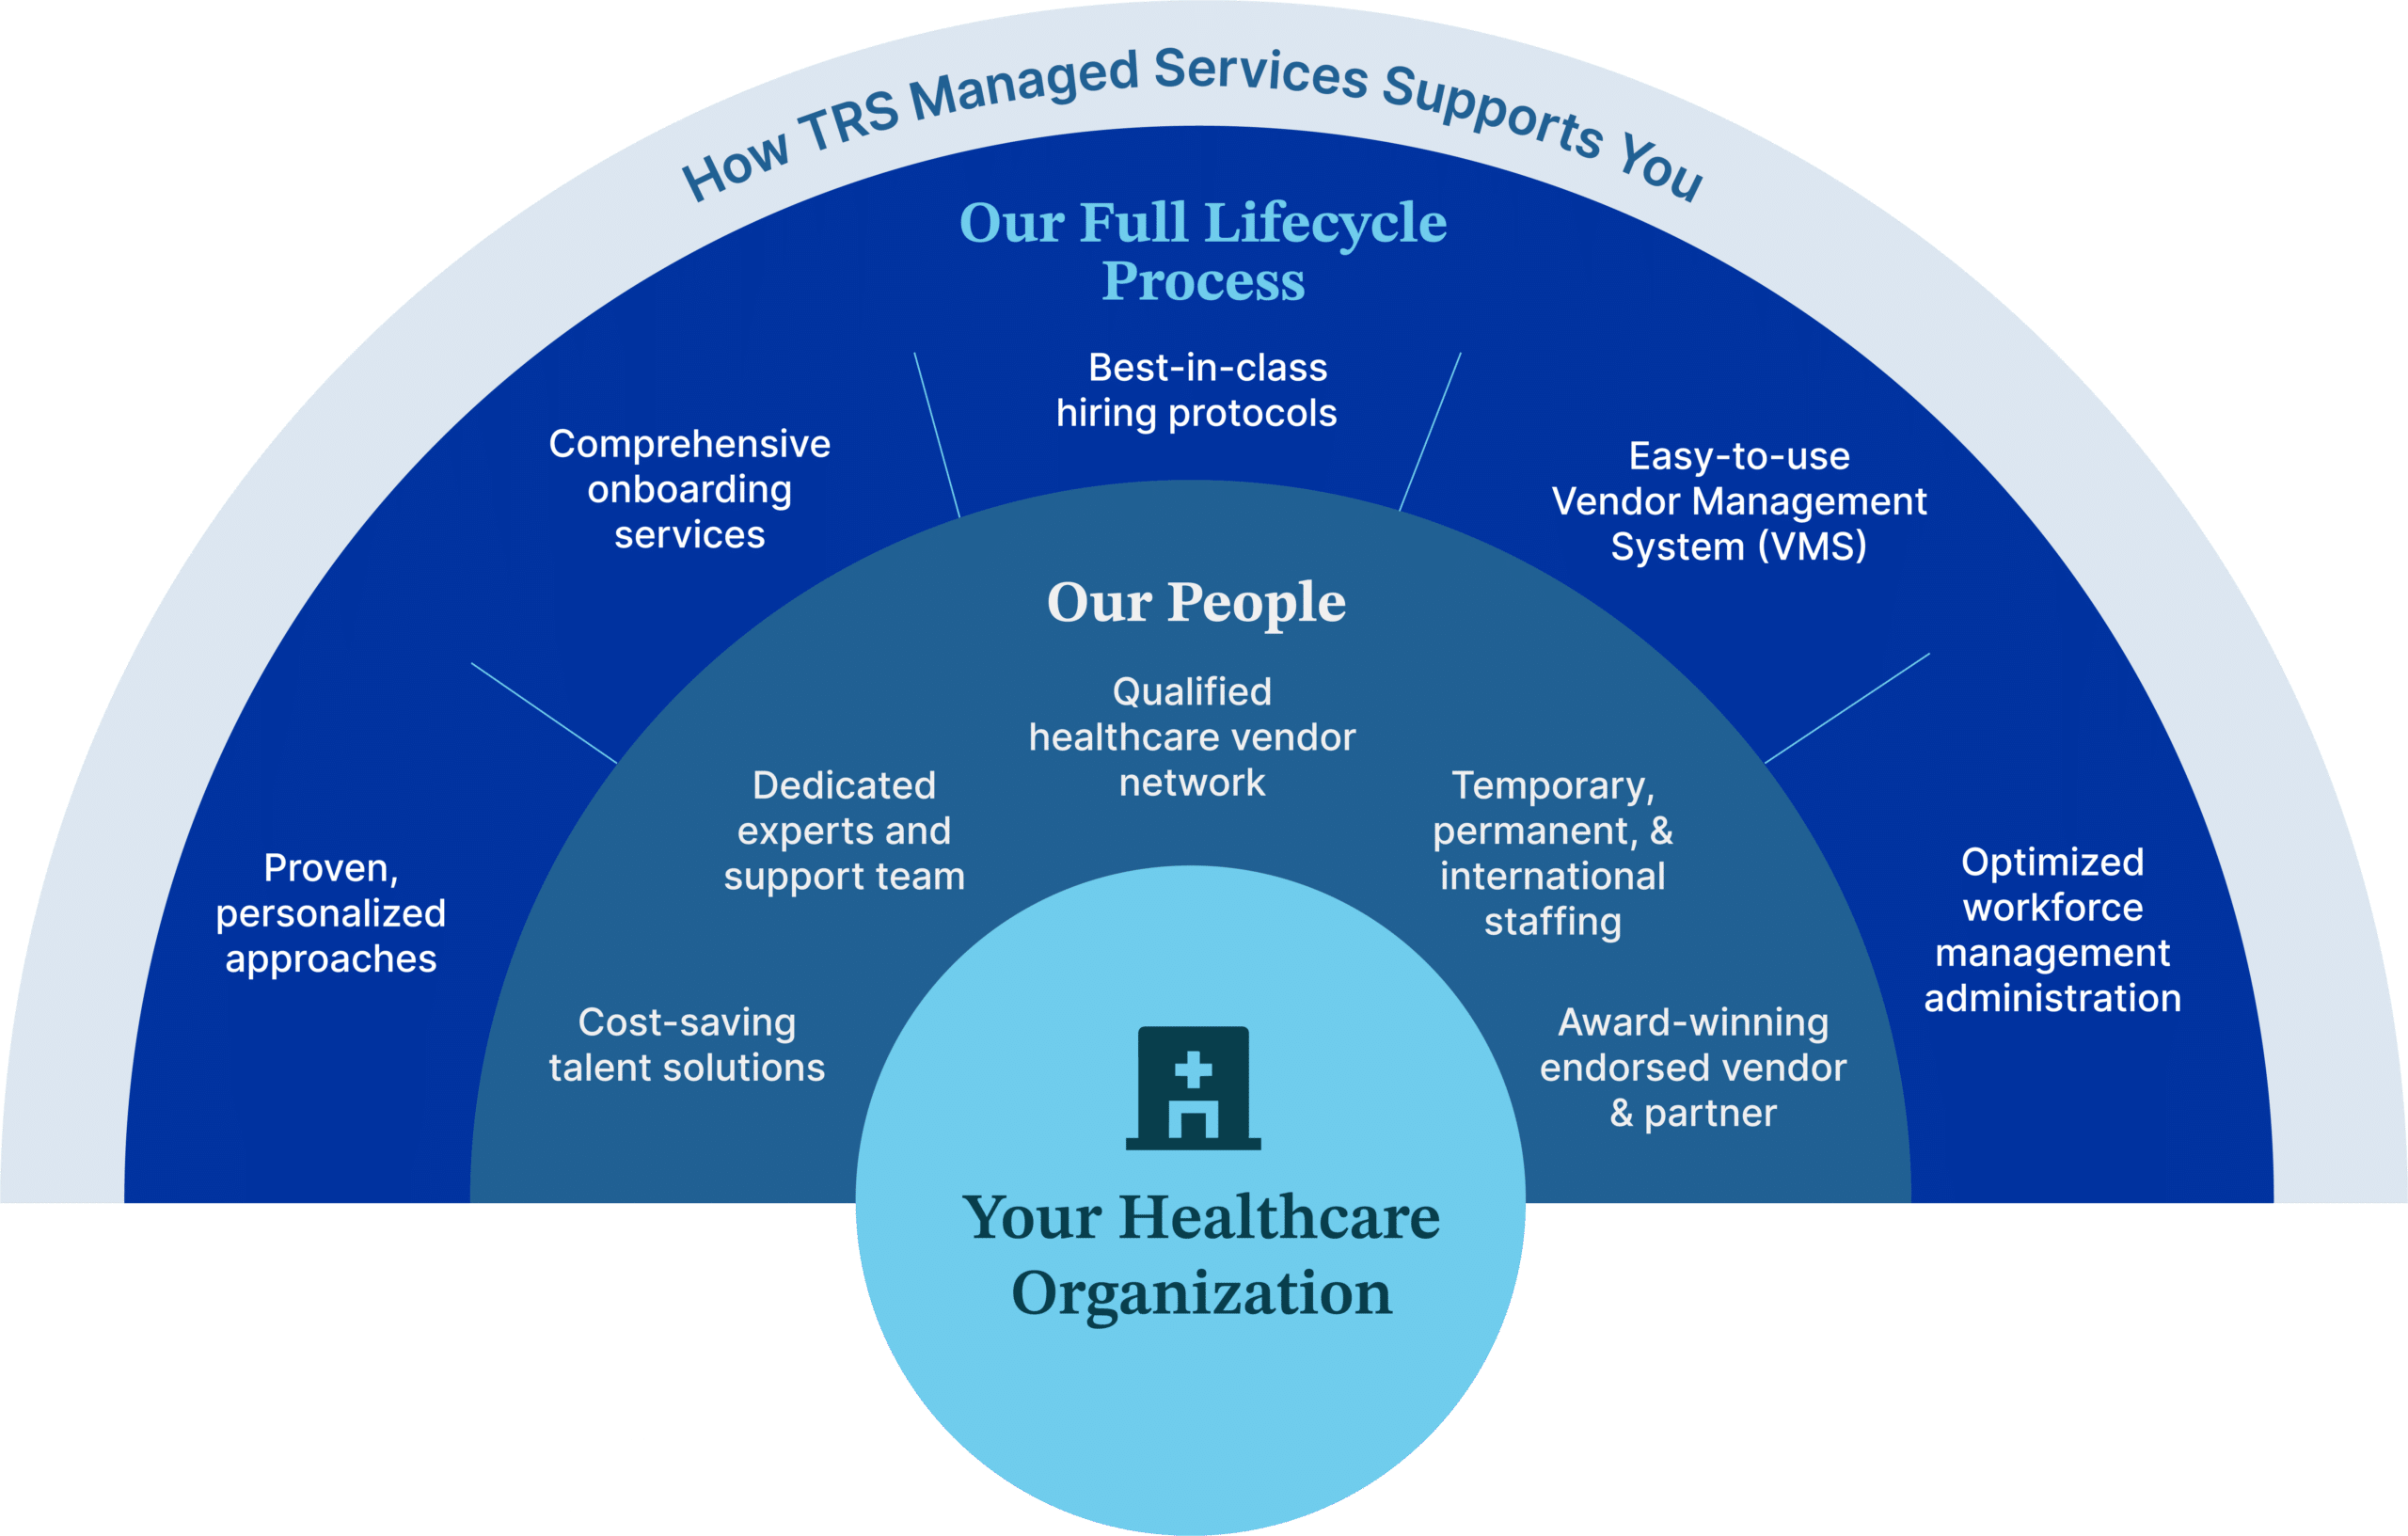 Graphic: How TRS Managed Services Supports You